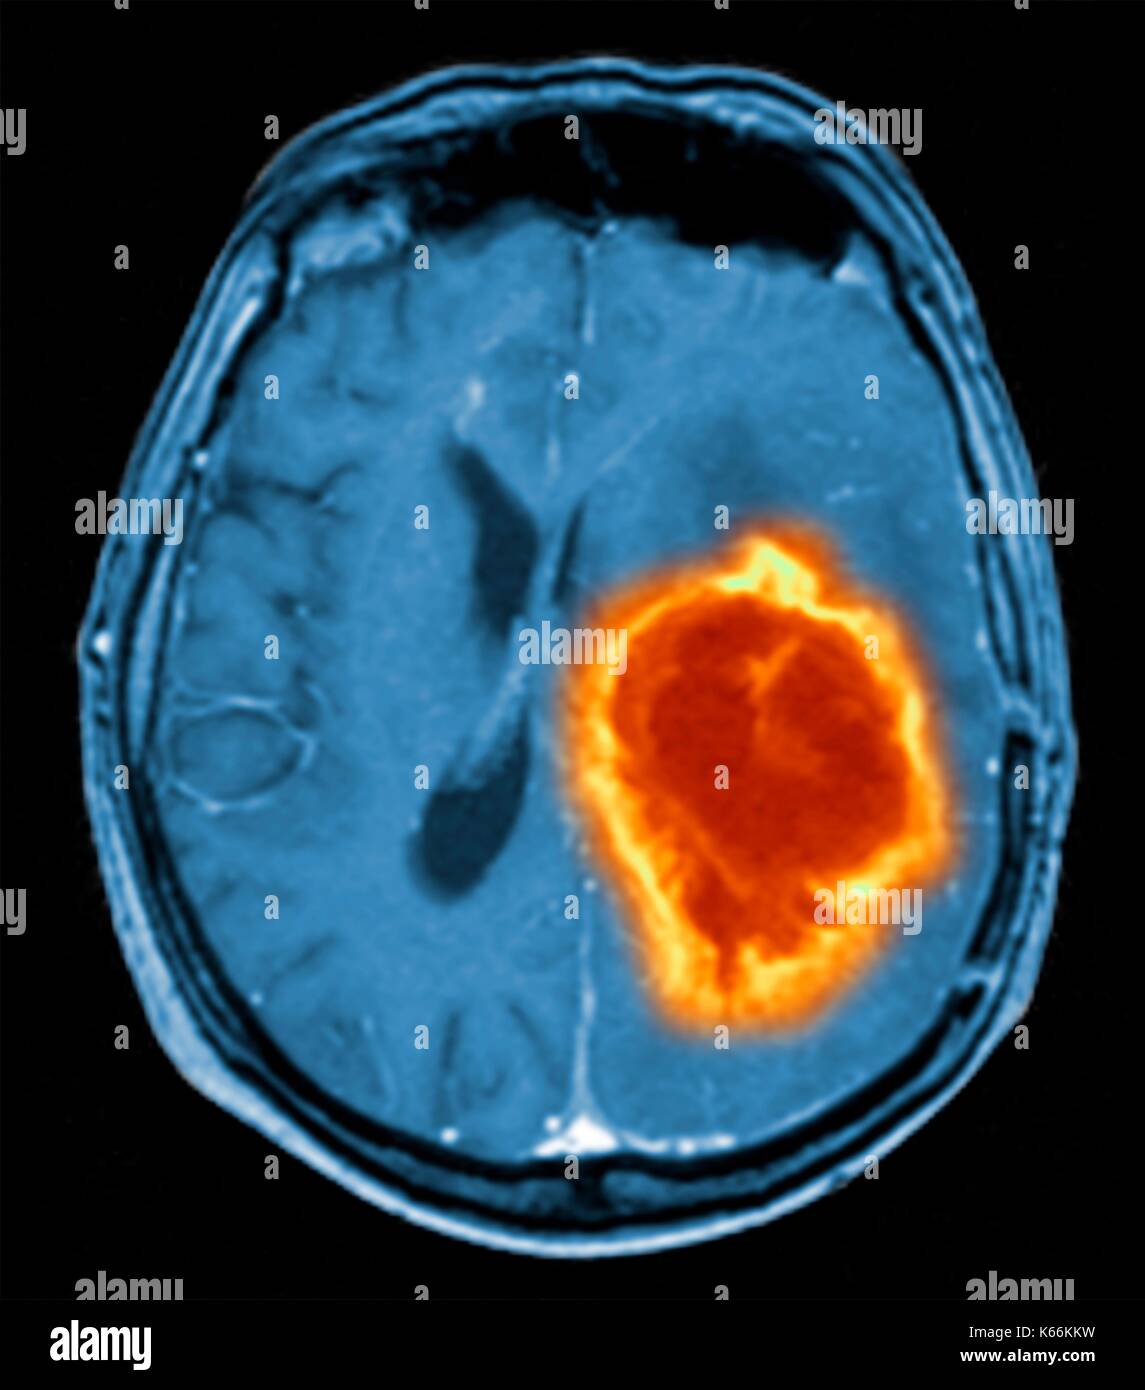 Brain tumour. Coloured Magnetic Resonance Imaging (MRI) scan of an axial section through the brain showing a metastatic tumour. At bottom left is the tumour (red-yellow) This tumour occurs within one cerebral hemisphere; the other hemisphere is at right. The eyeballs - not visible -are at top. Metastatic cancer is a secondary disease spread from cancer elsewhere in the body. Metastatic brain tumours are malignant. Typically they cause brain compression and nerve damage Stock Photo